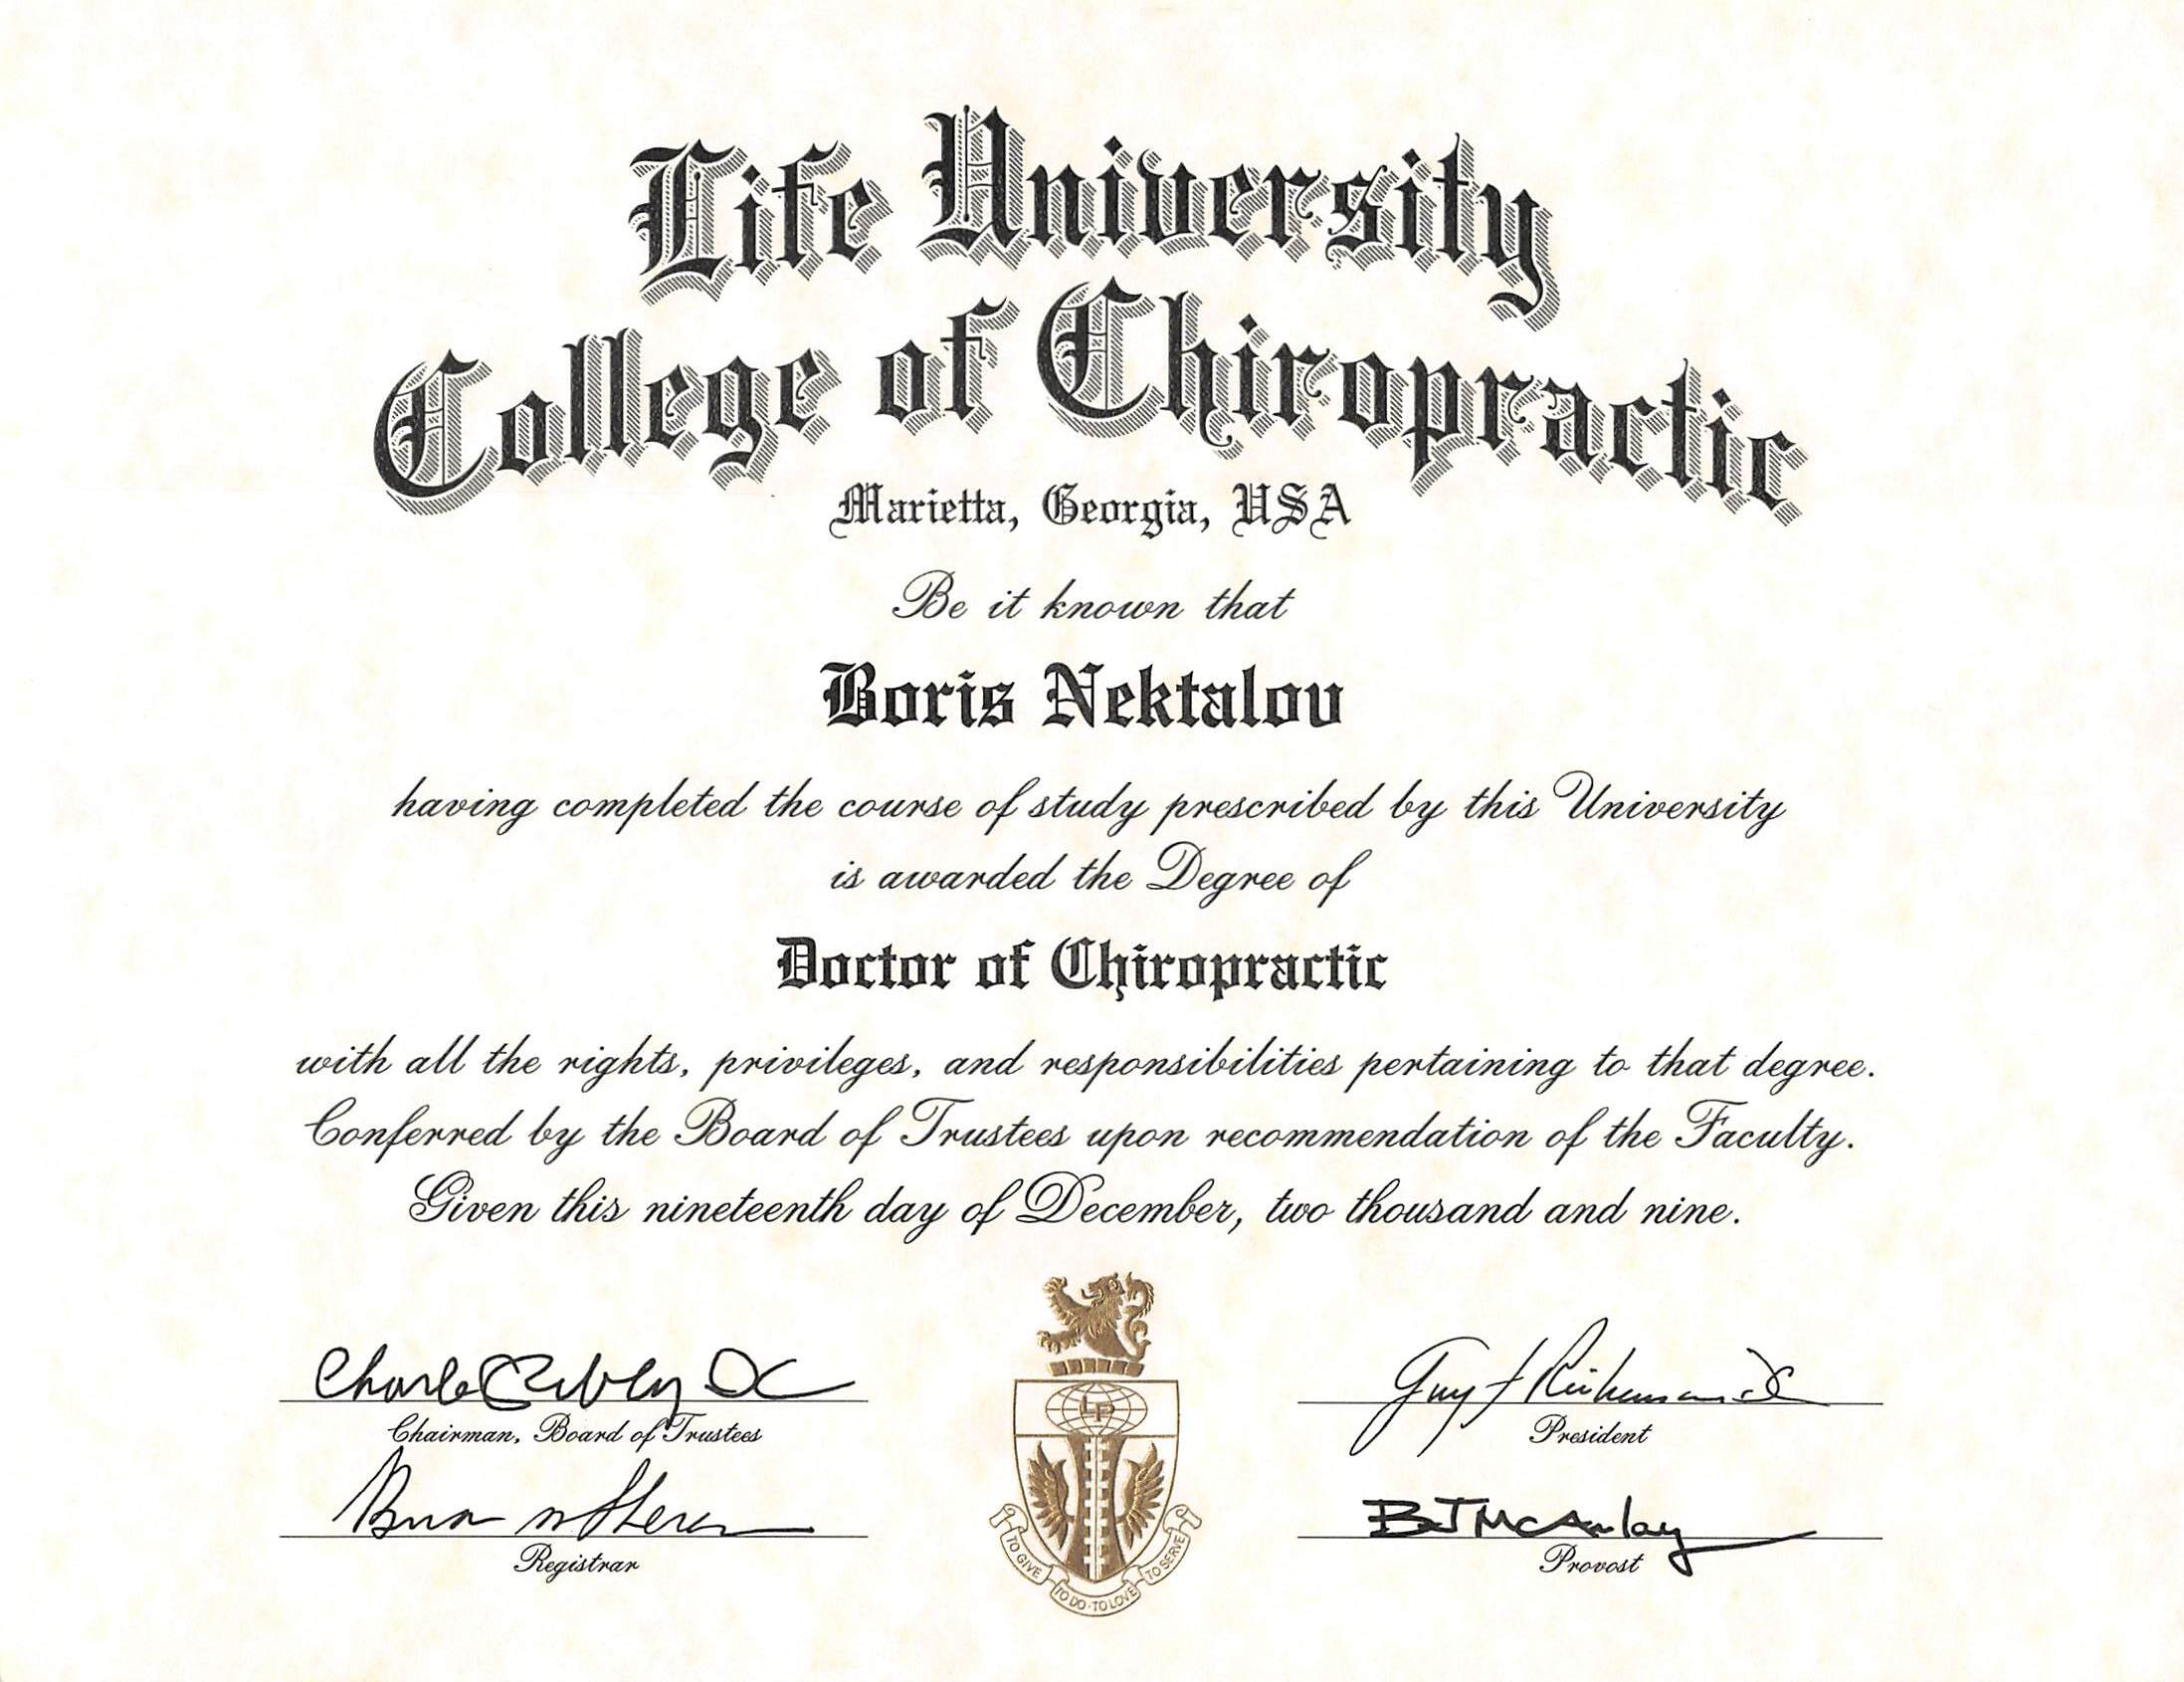 Life University Collage of Chiropractic